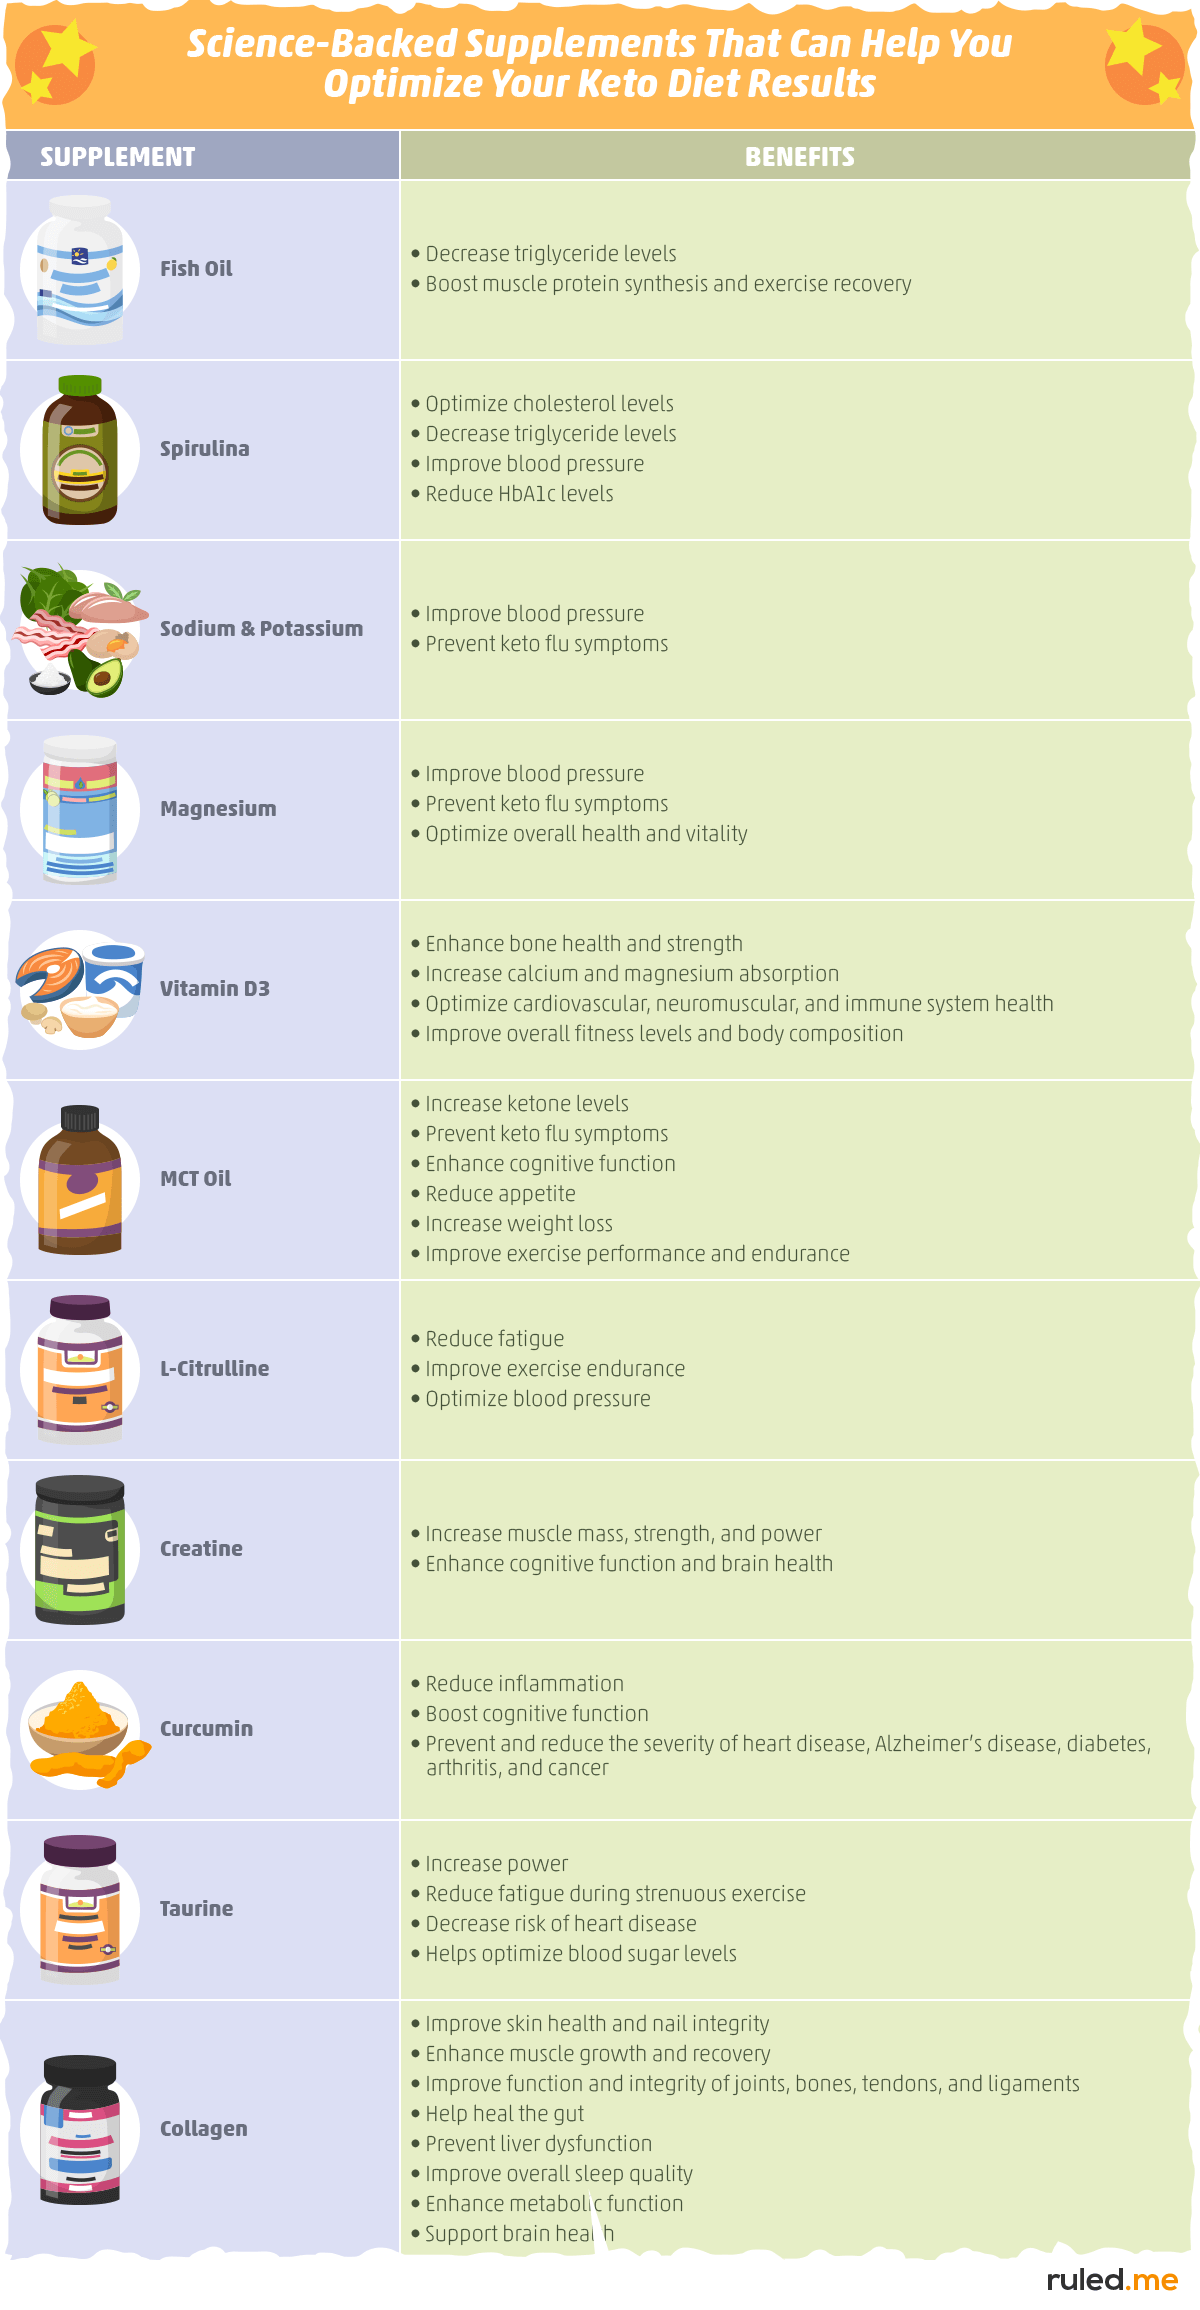 What Supplements Should You Take While You Are on the Keto Diet?